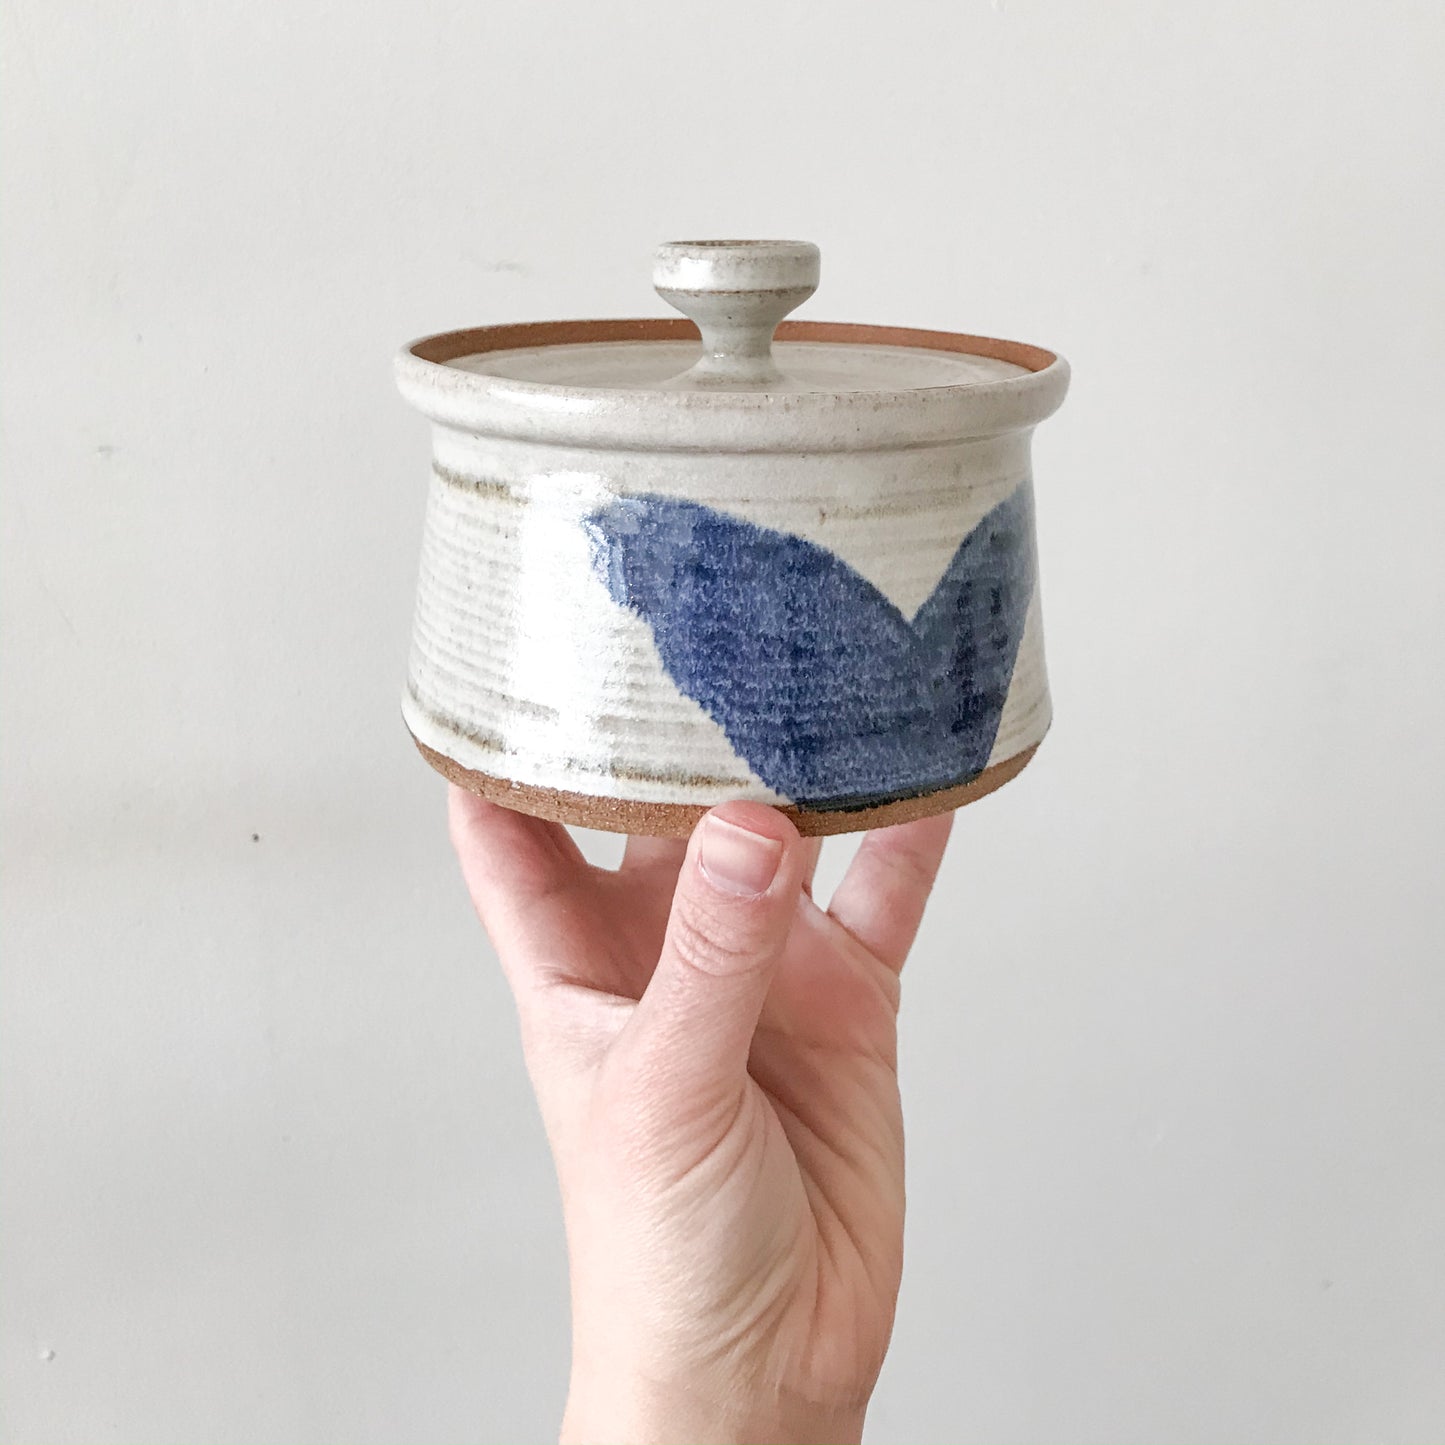 Ceramic Lidded Container w/ Spoon Slot